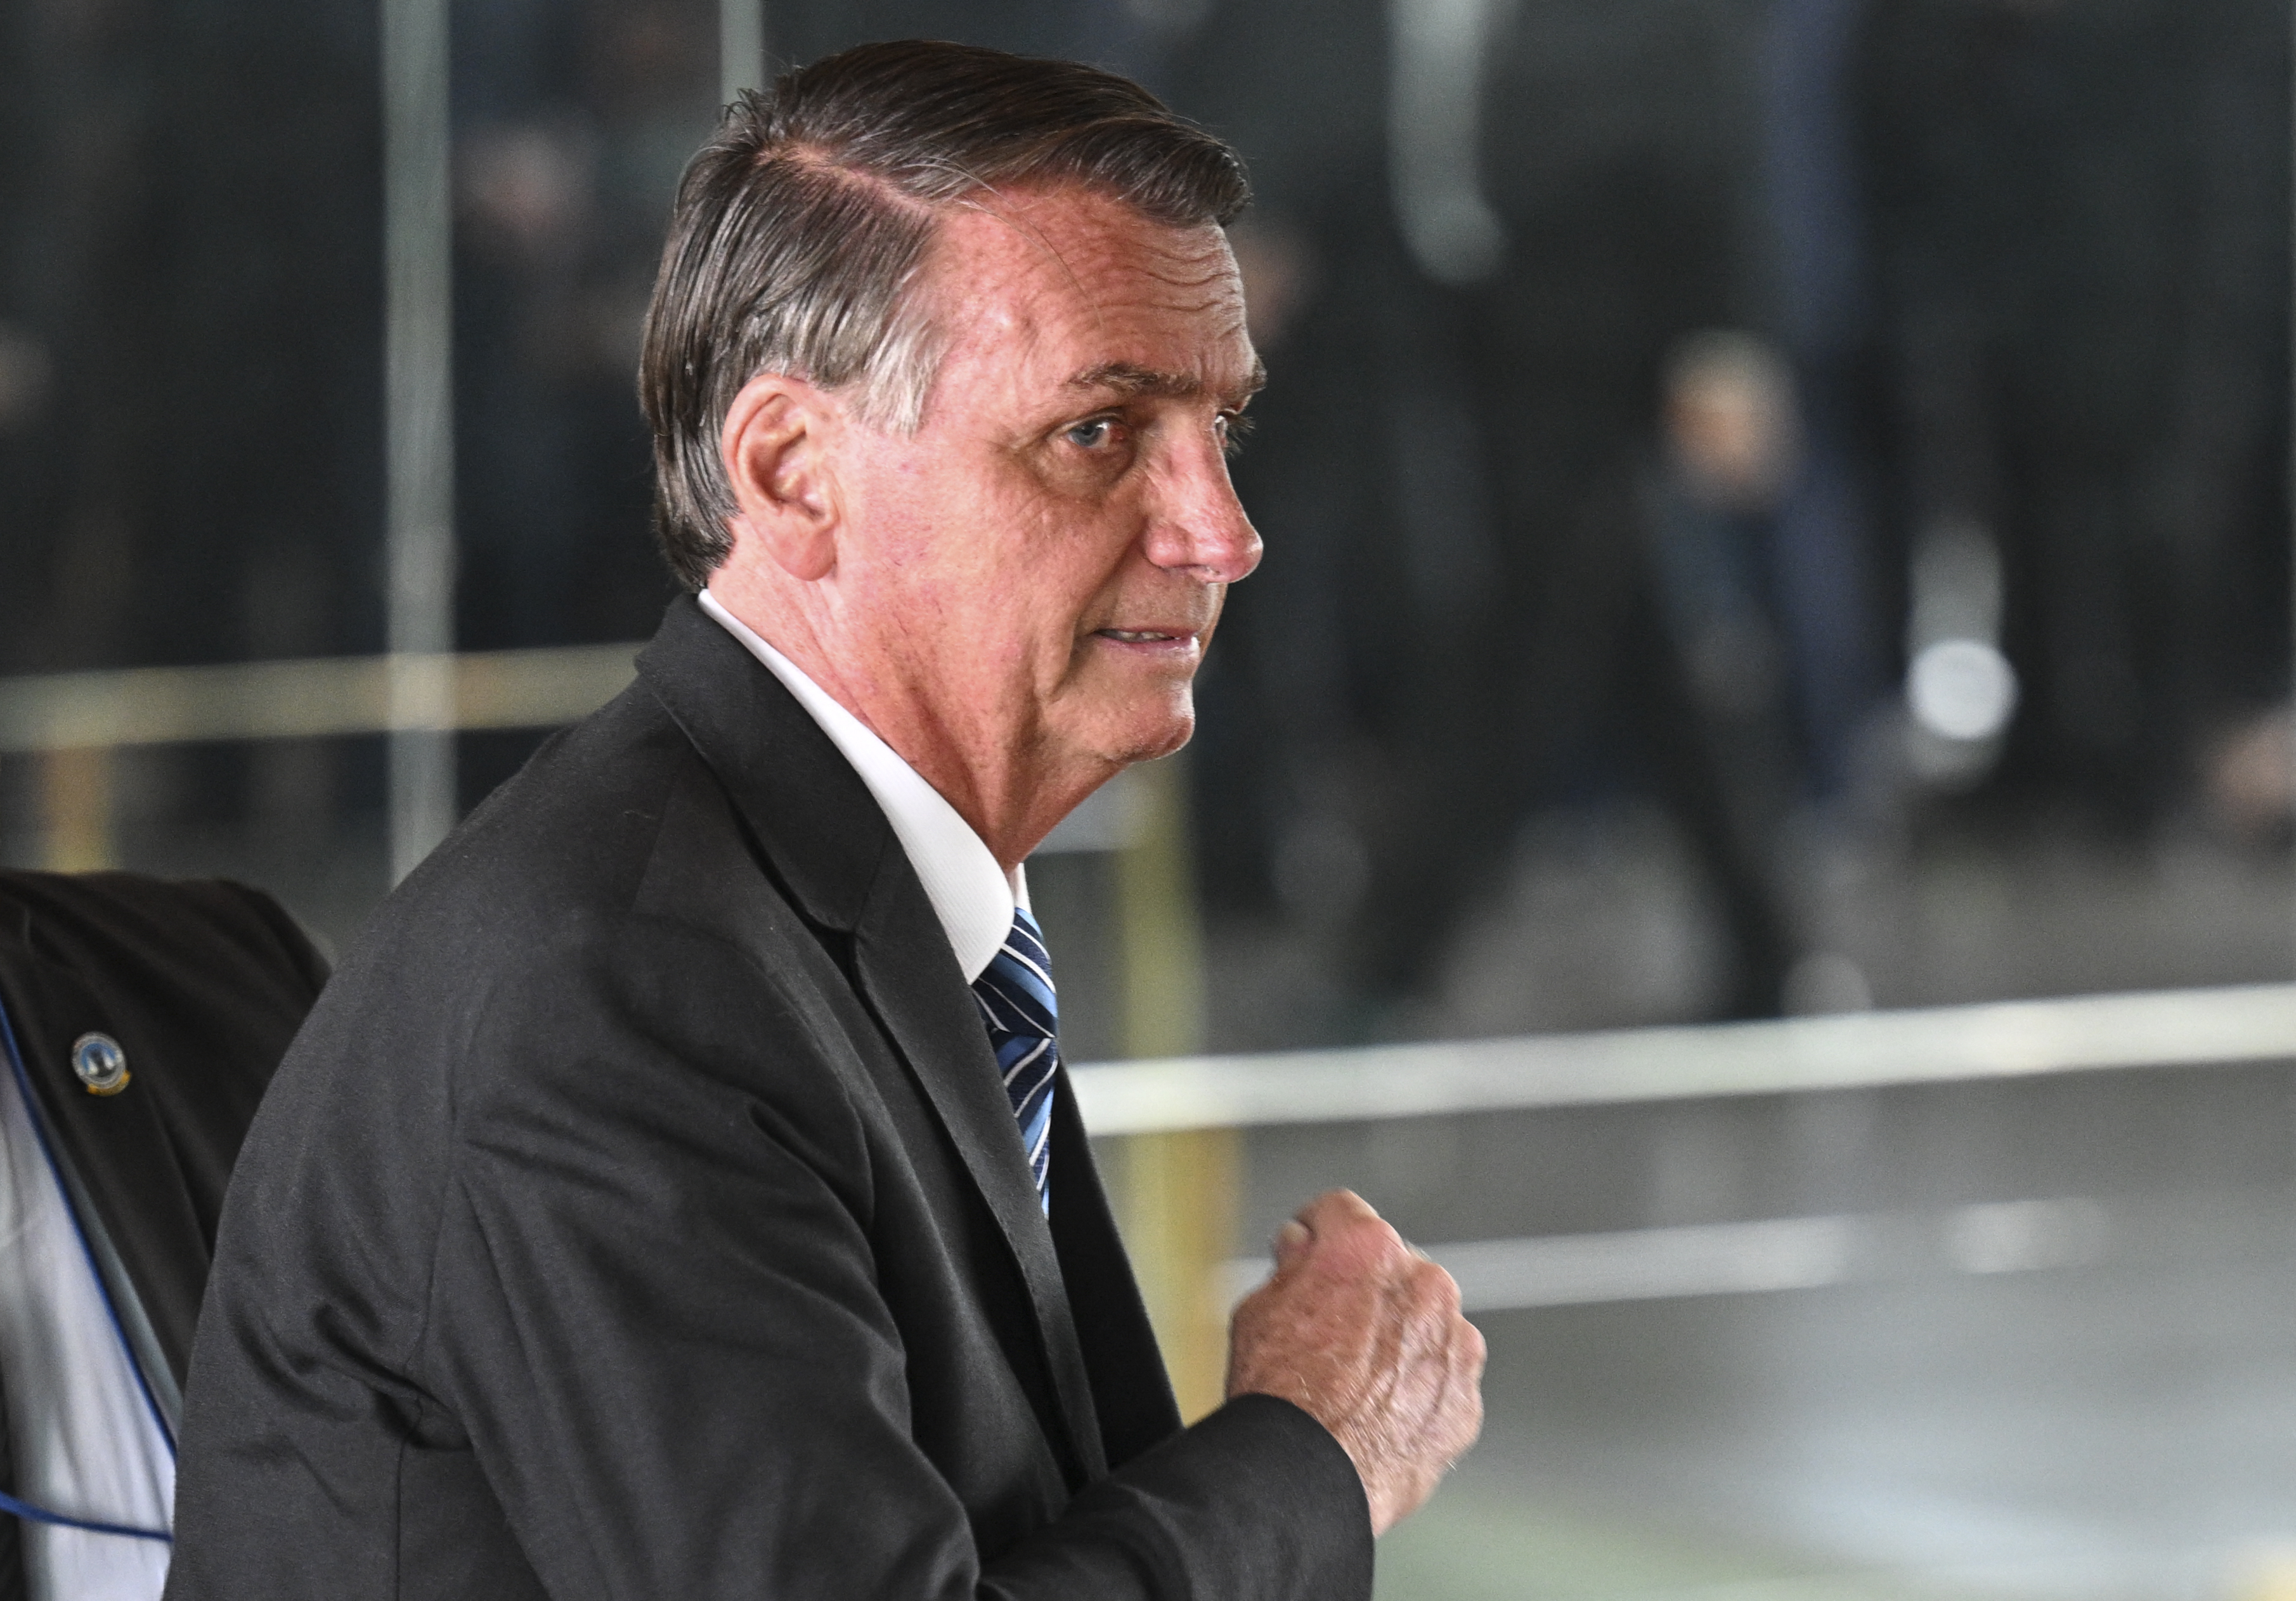 Brazilian President Jair Bolsonaro leaves after making a statement for the first time since Sunday's presidential run-off election, at Alvorada Palace in Brasilia, on November 1, 2022. - Brazil's Bolsonaro sais will 'comply' with constitution after poll loss. (Photo by EVARISTO SA / AFP)